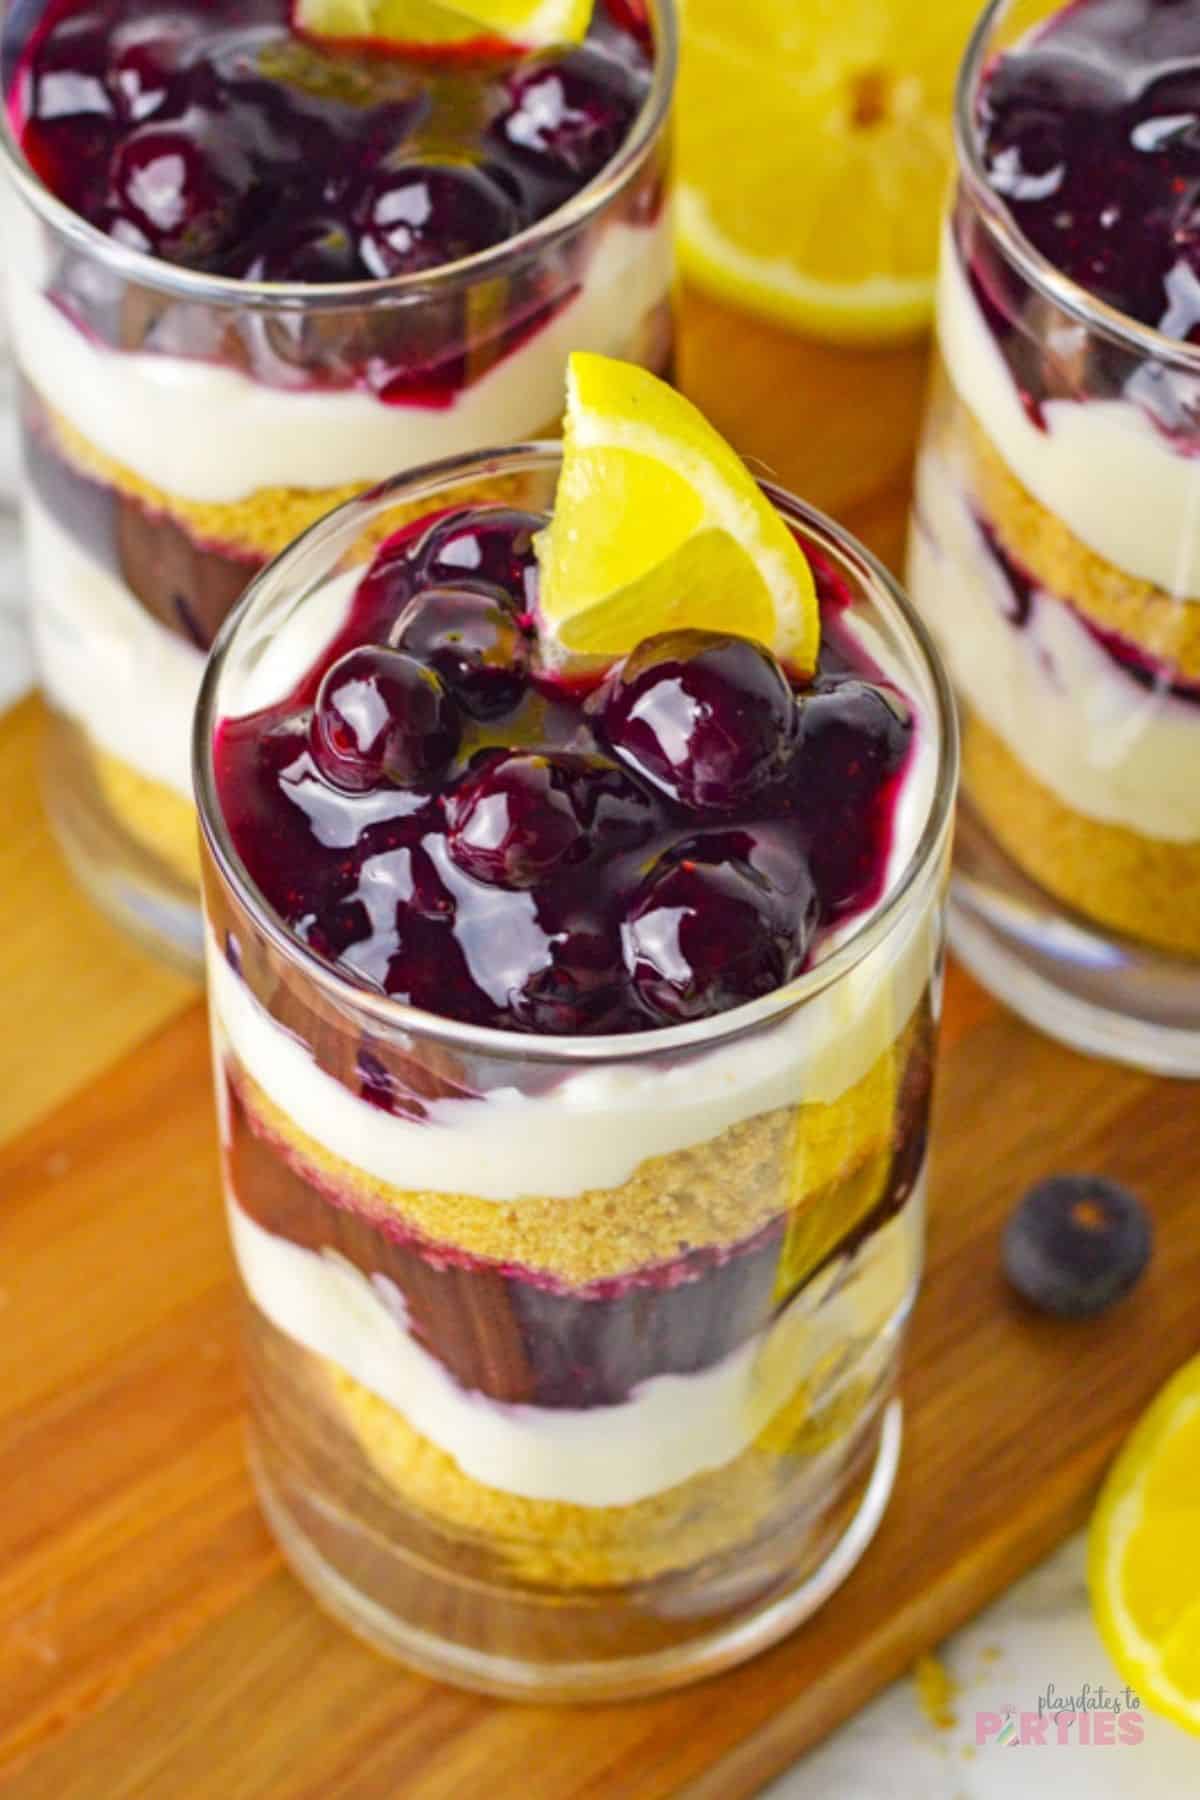 Looking down at the top of a parfait with luscious blueberry sauce garnished with a lemon wedge.